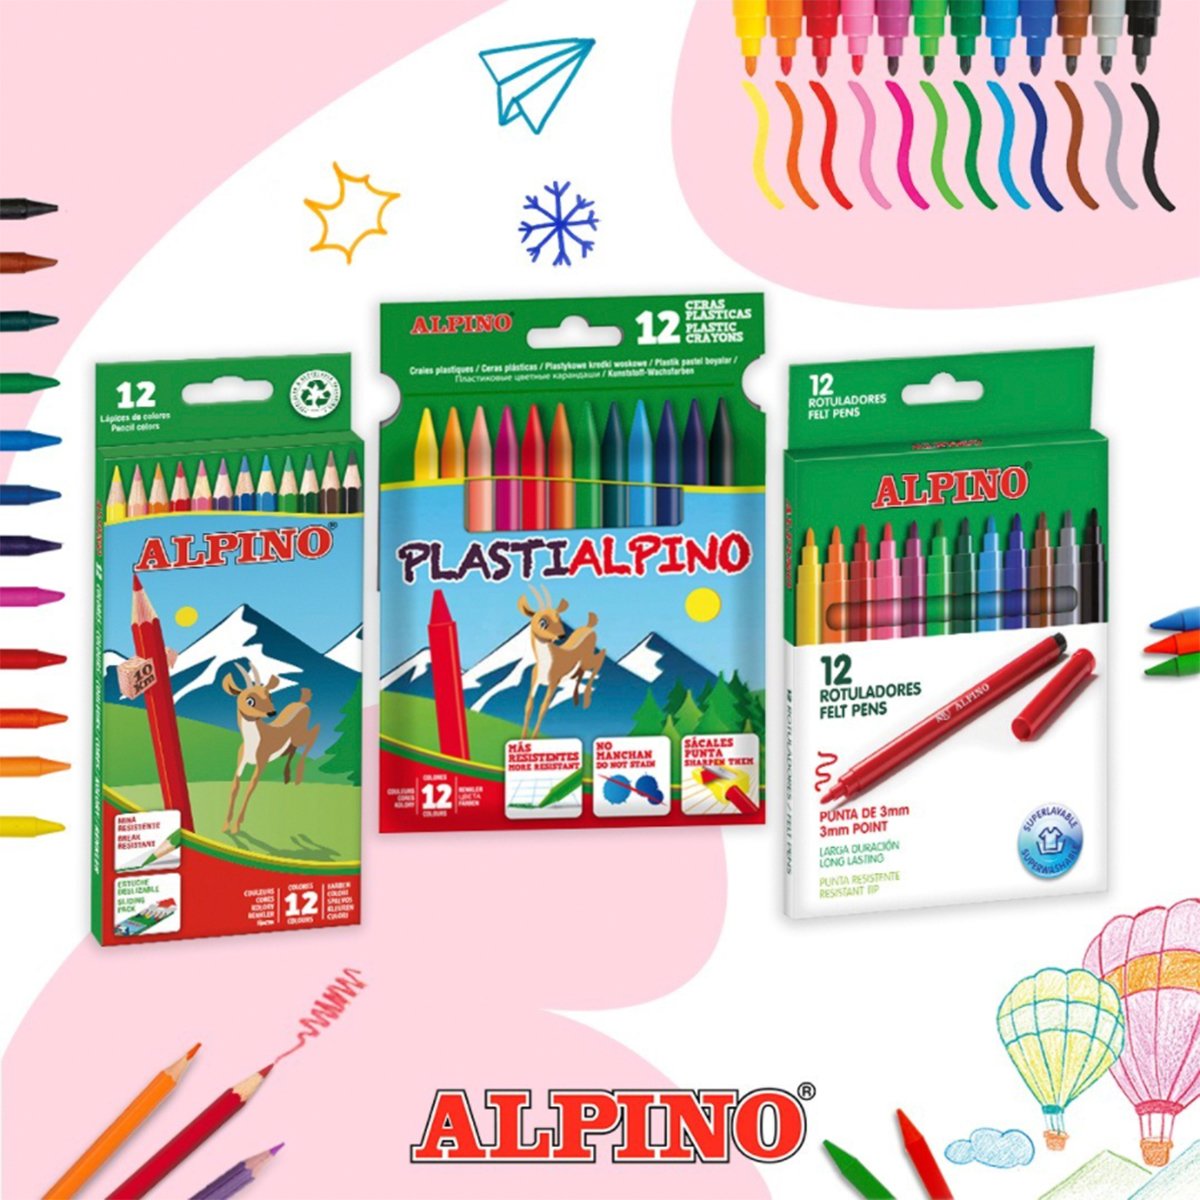 Rotuladores Alpino Standard 12 Colores Pack Promo 12 Cajas Rotuladores + 6  Cajas Lapices Plastialpino 12 — Firpack